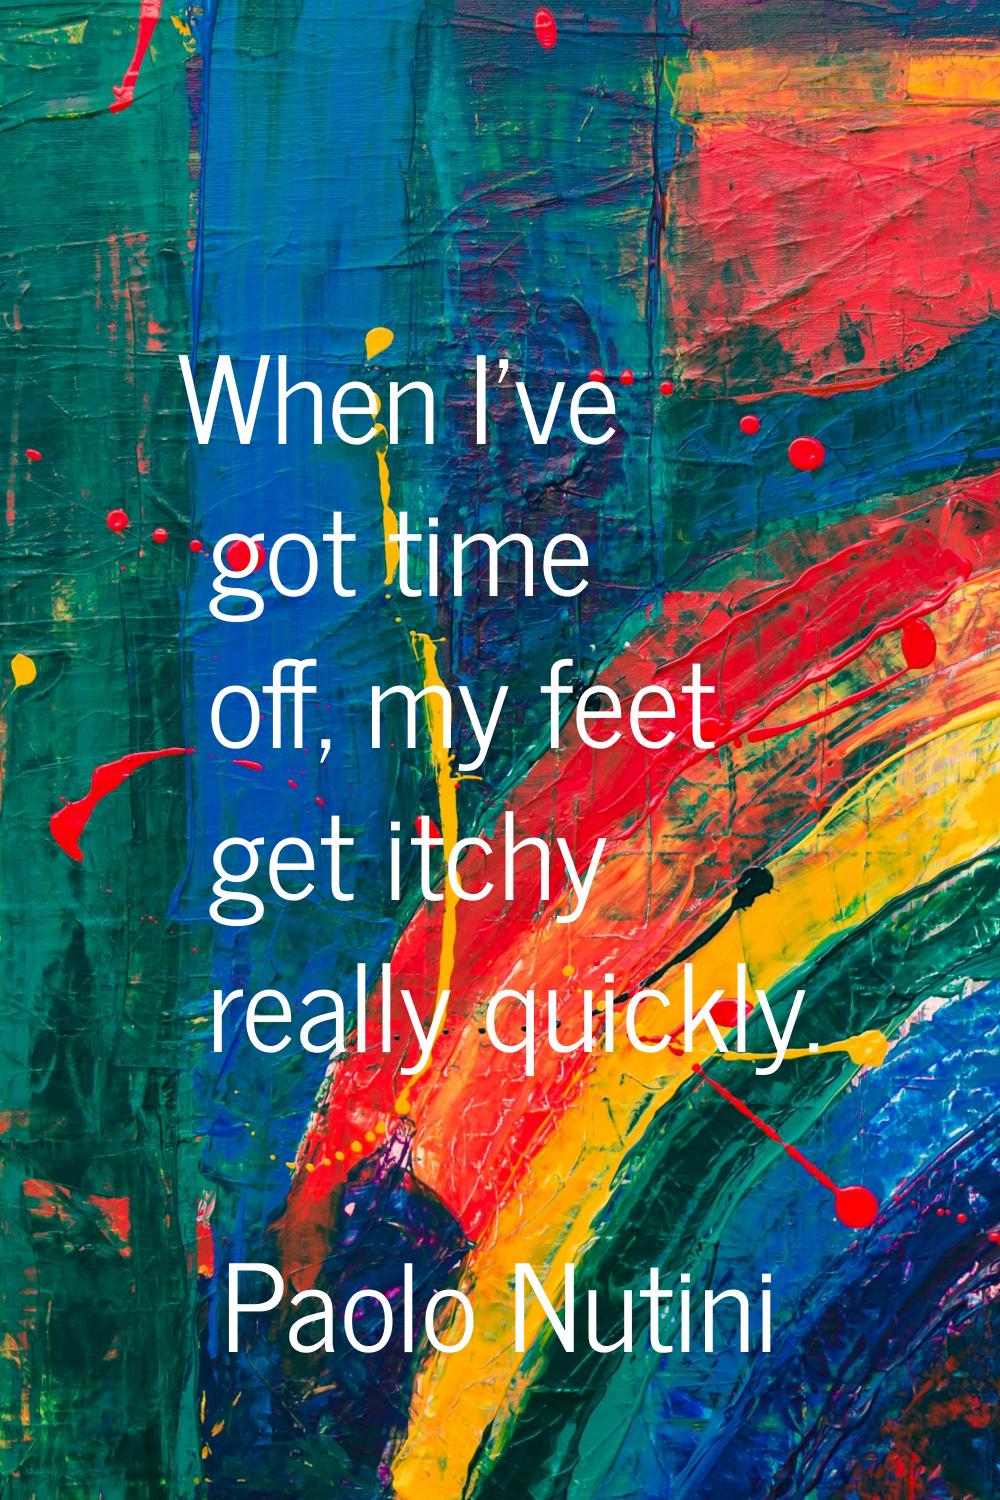 When I've got time off, my feet get itchy really quickly.